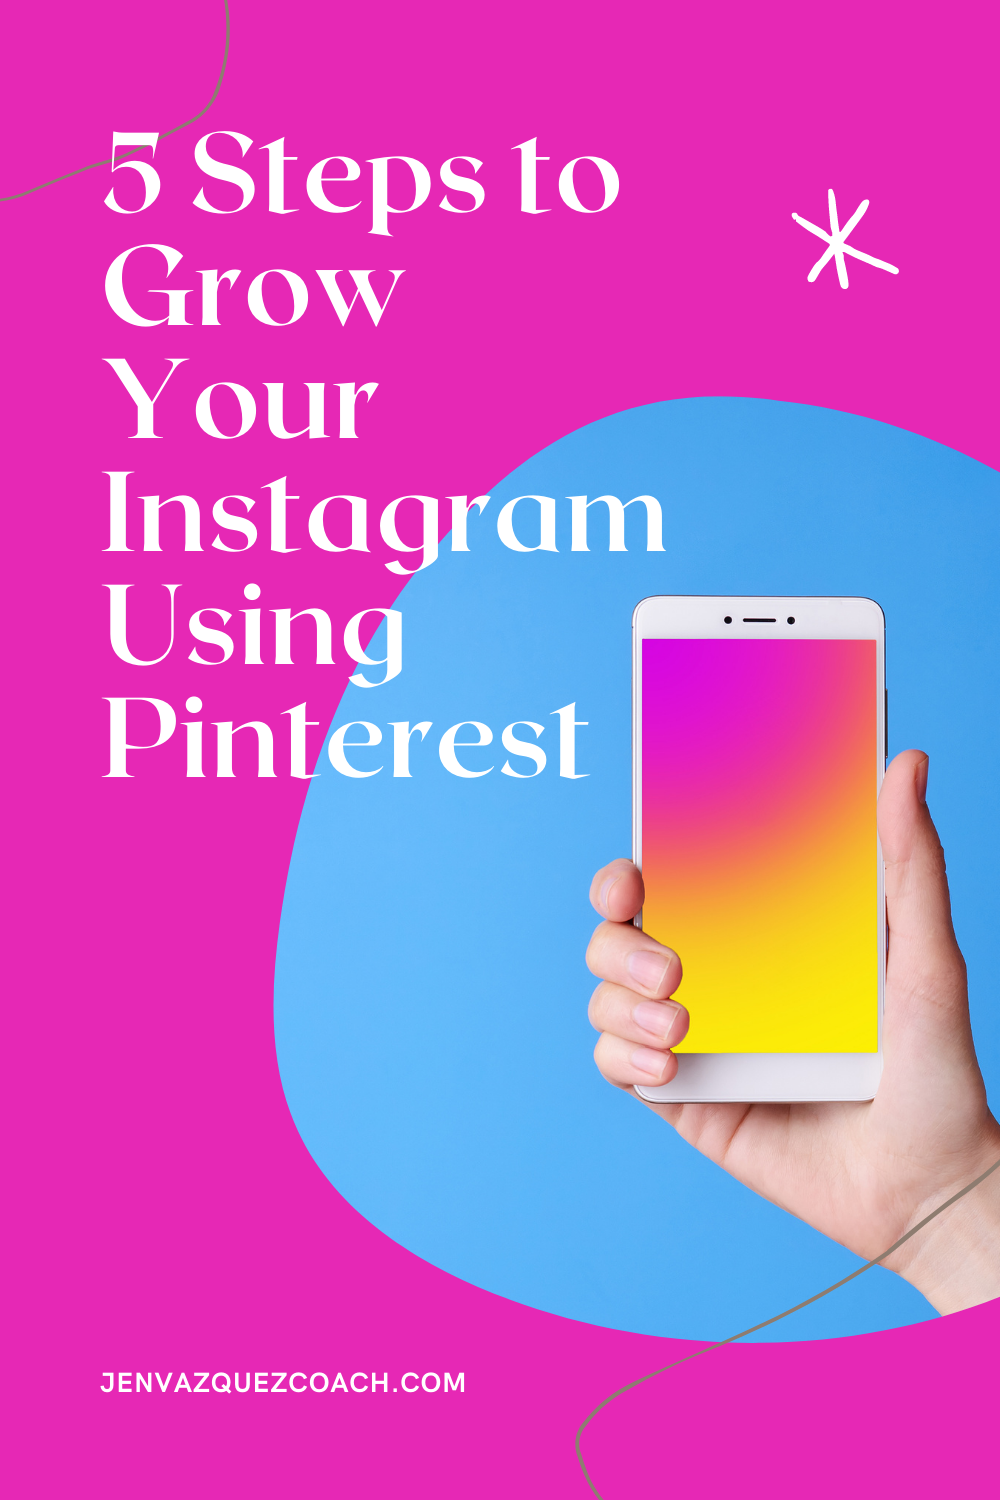 5 Steps to Grow Your Instagram Using Pinterest5